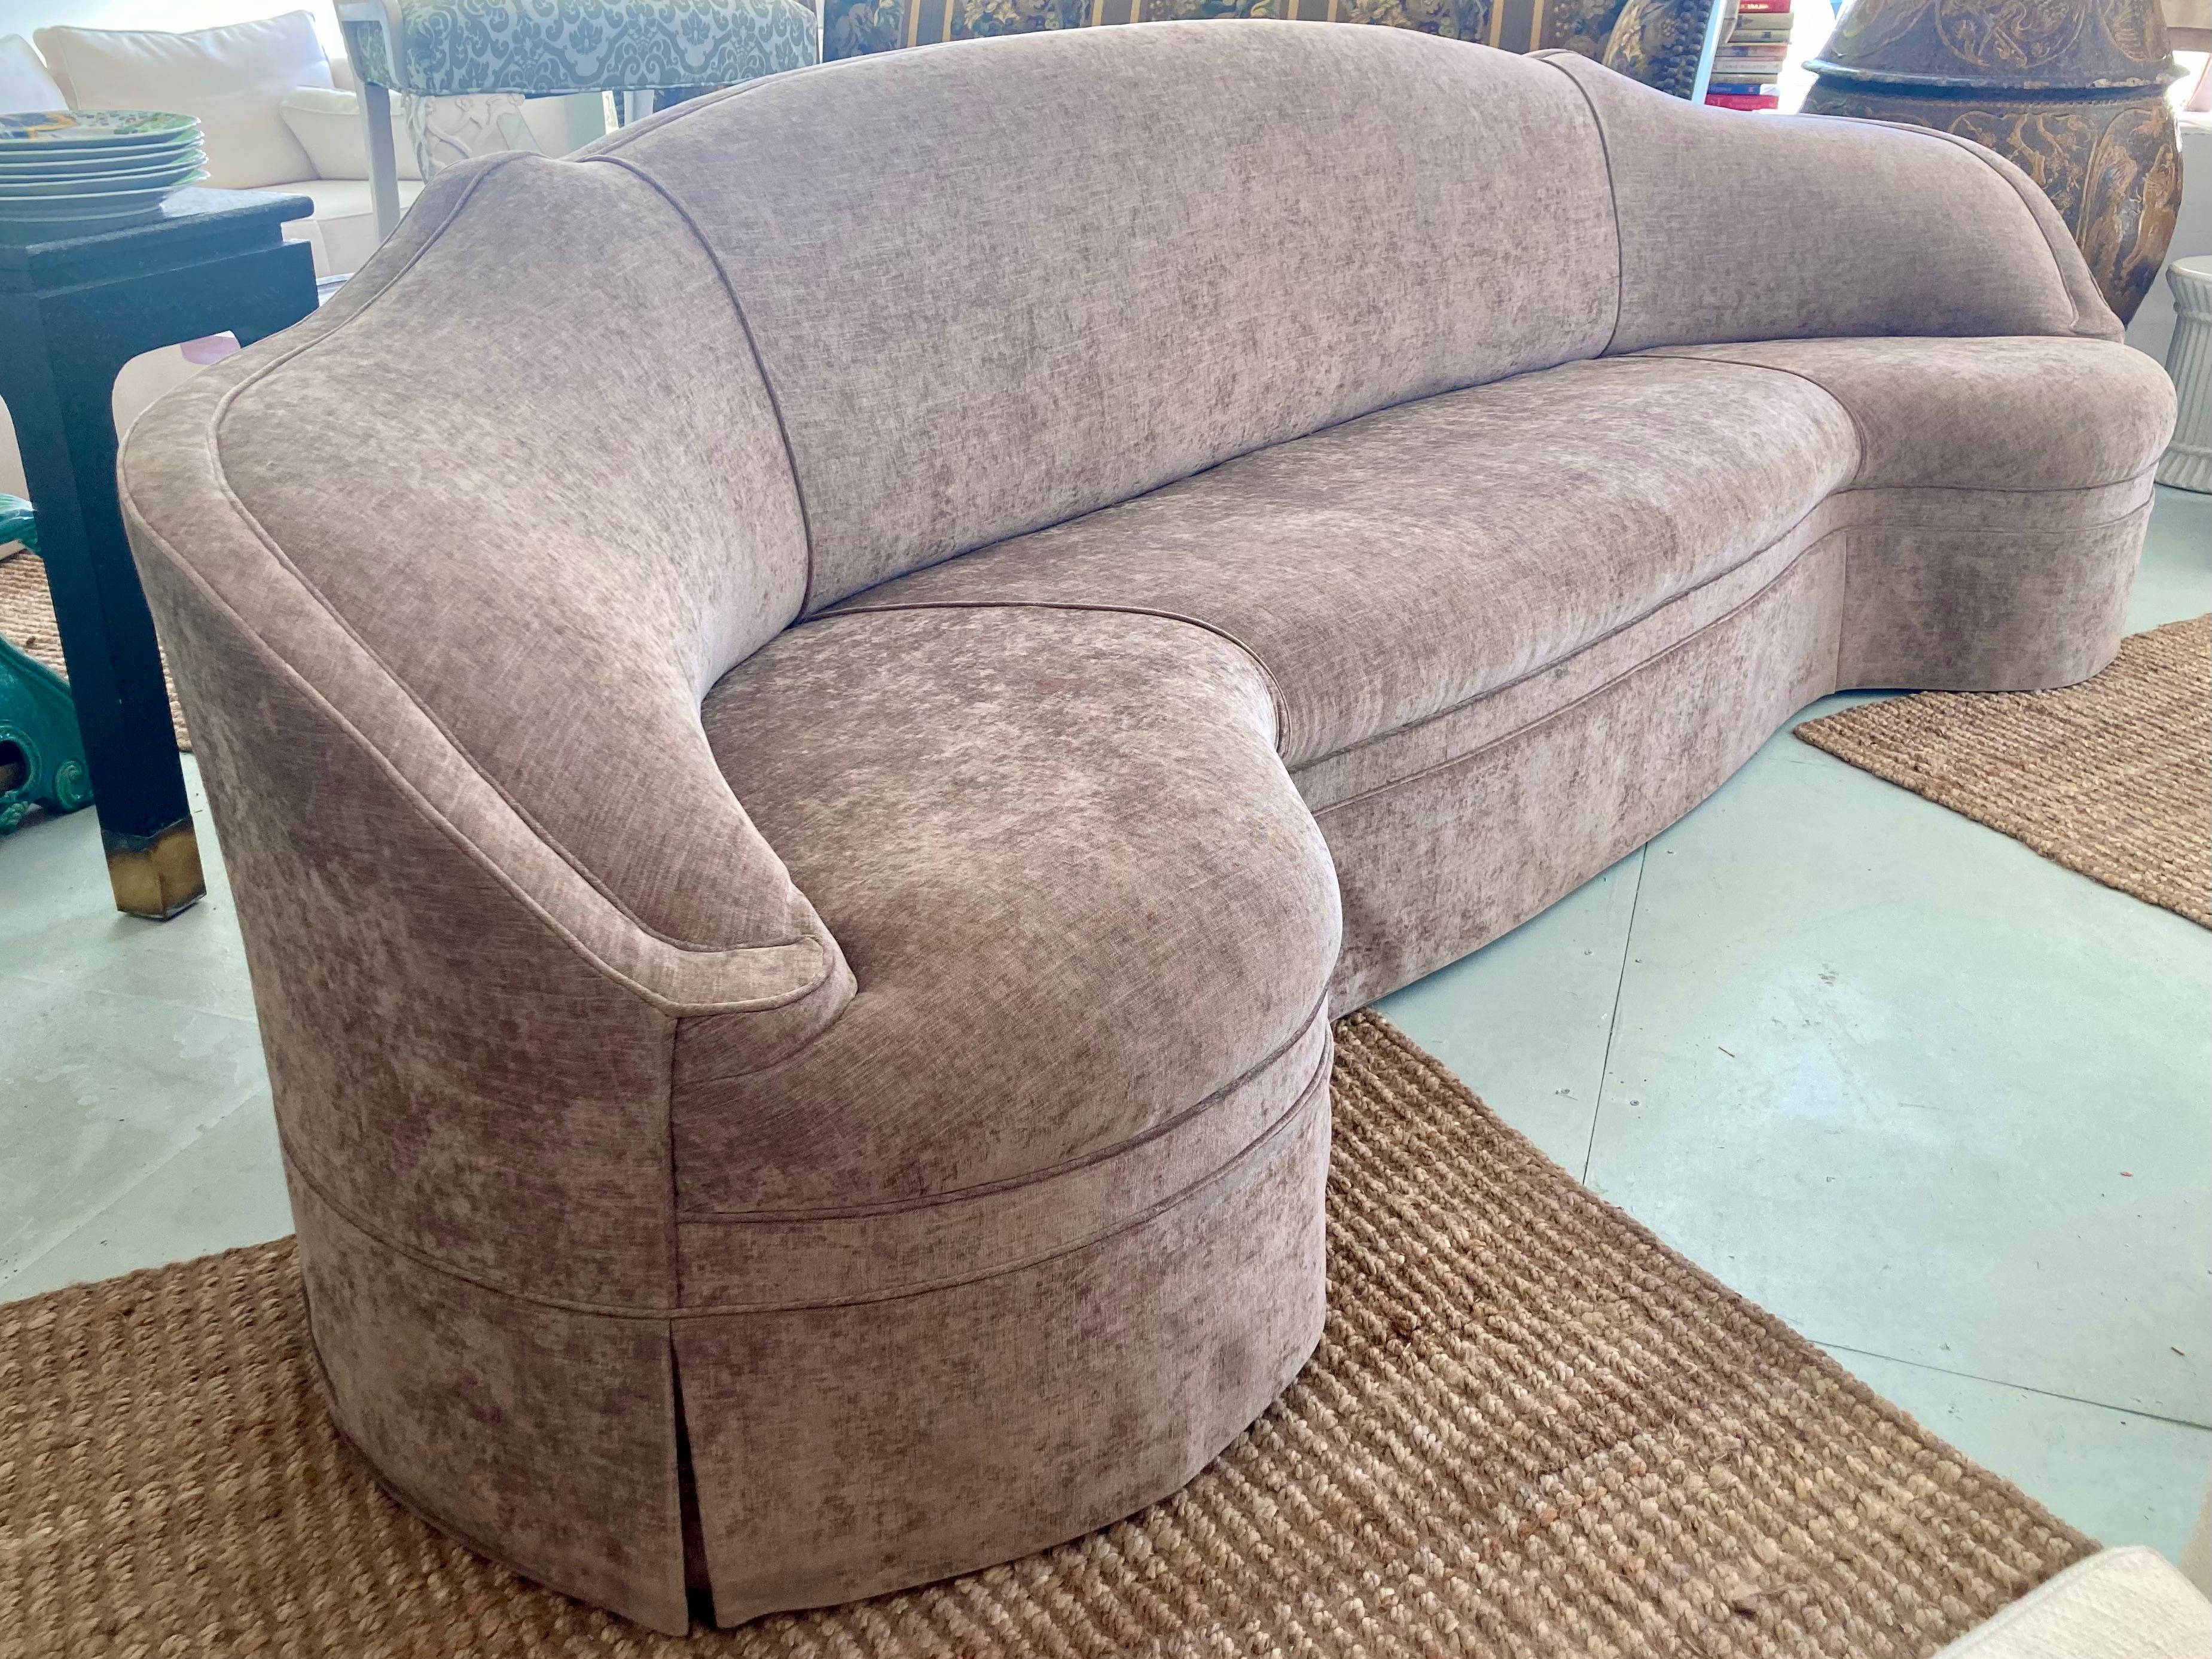 Beautiful vintage Michael Taylor custom Schiaparelli sofa. Custom size at 10 feet long! Nice velvet/chenille taupe color fabric. The fabric is in good condition. As-is. Some wear, but in good usable condition. You can also have your upholstery team